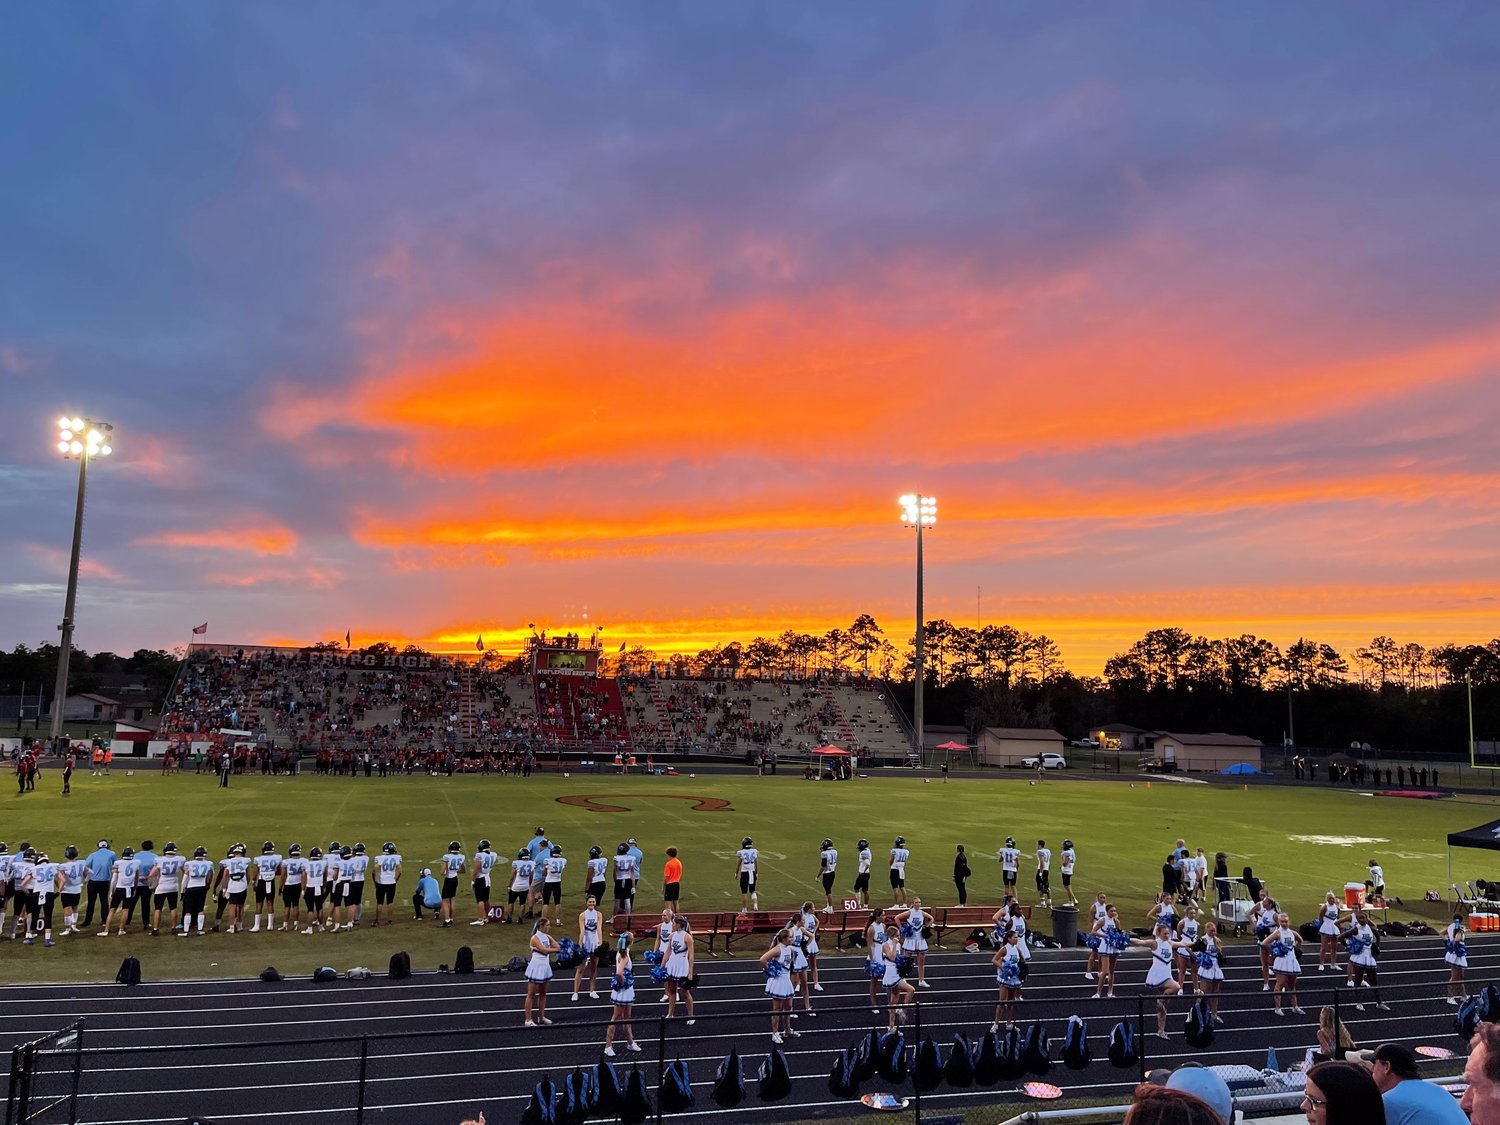 It was a beautiful night for the Sharks, as they earned their first win of the 2022 season against Middleburg Sept. 16.